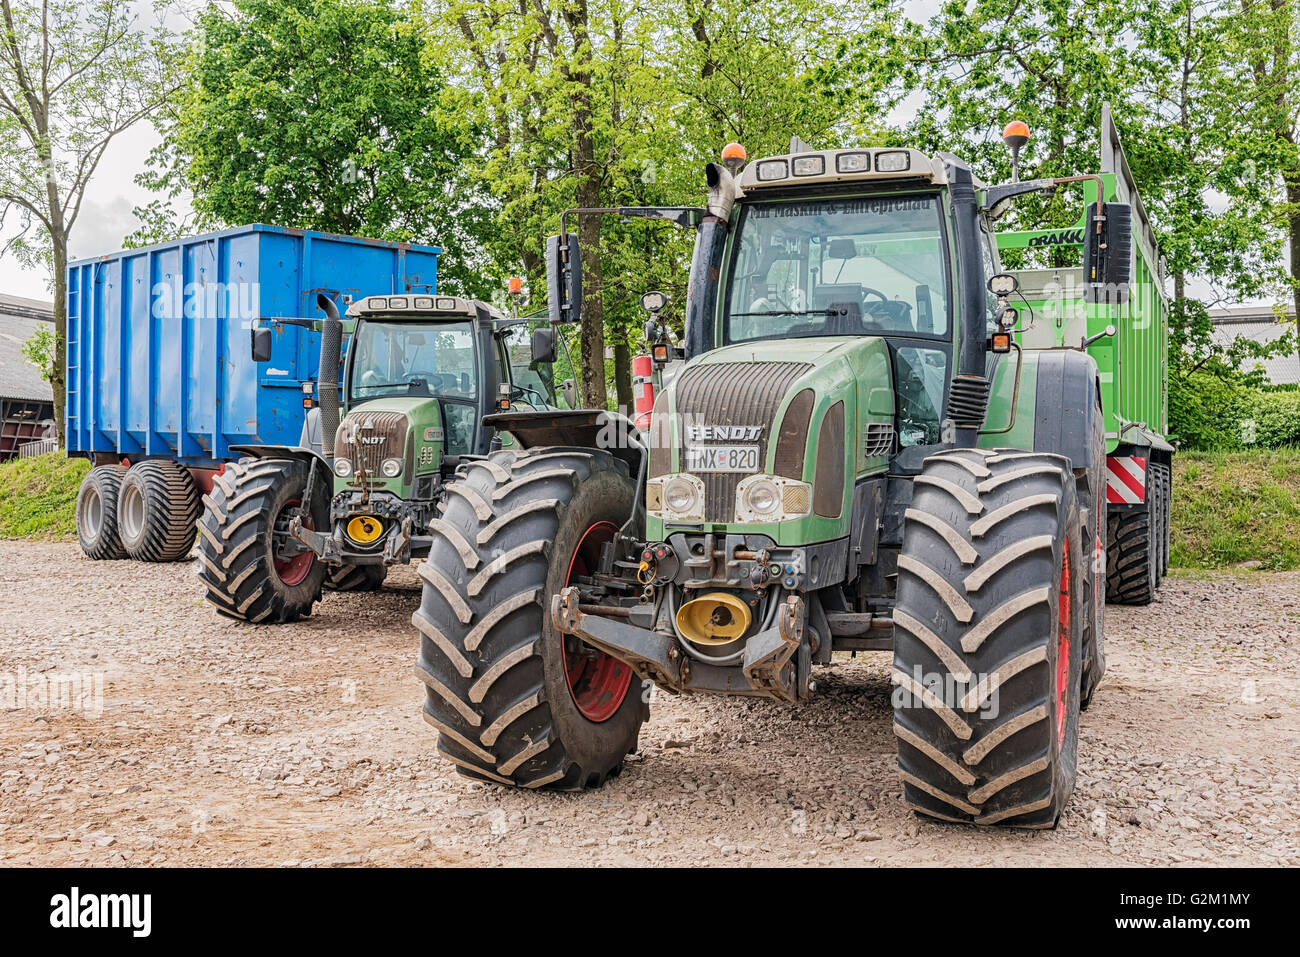 Tractor FENDT  Vario. Fendt is a German manufacturer of agricultural tractors machines, manufact Stock Photo